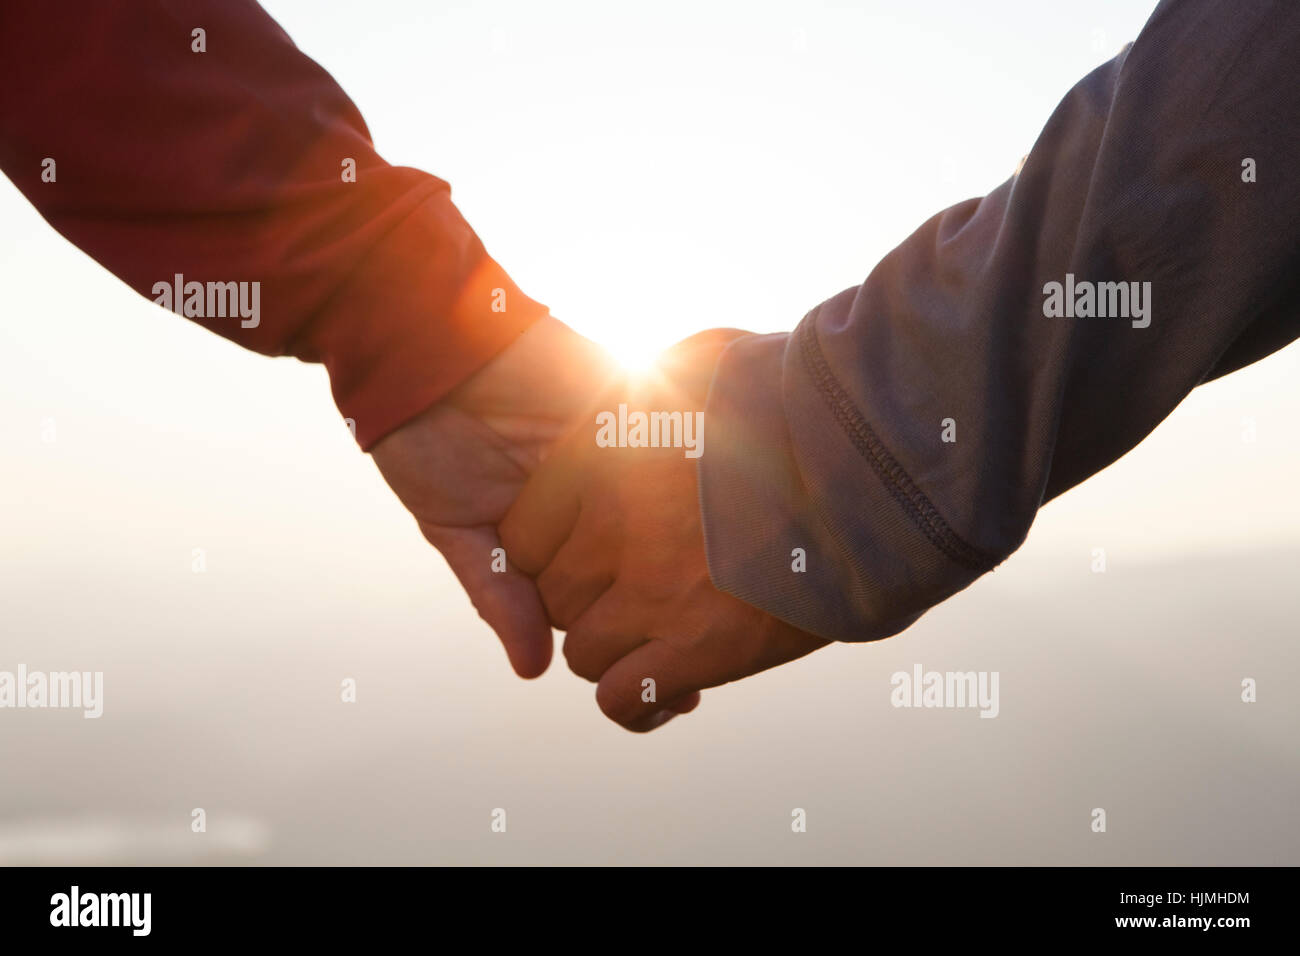 Couple hand in hand at sunset Stock Photo